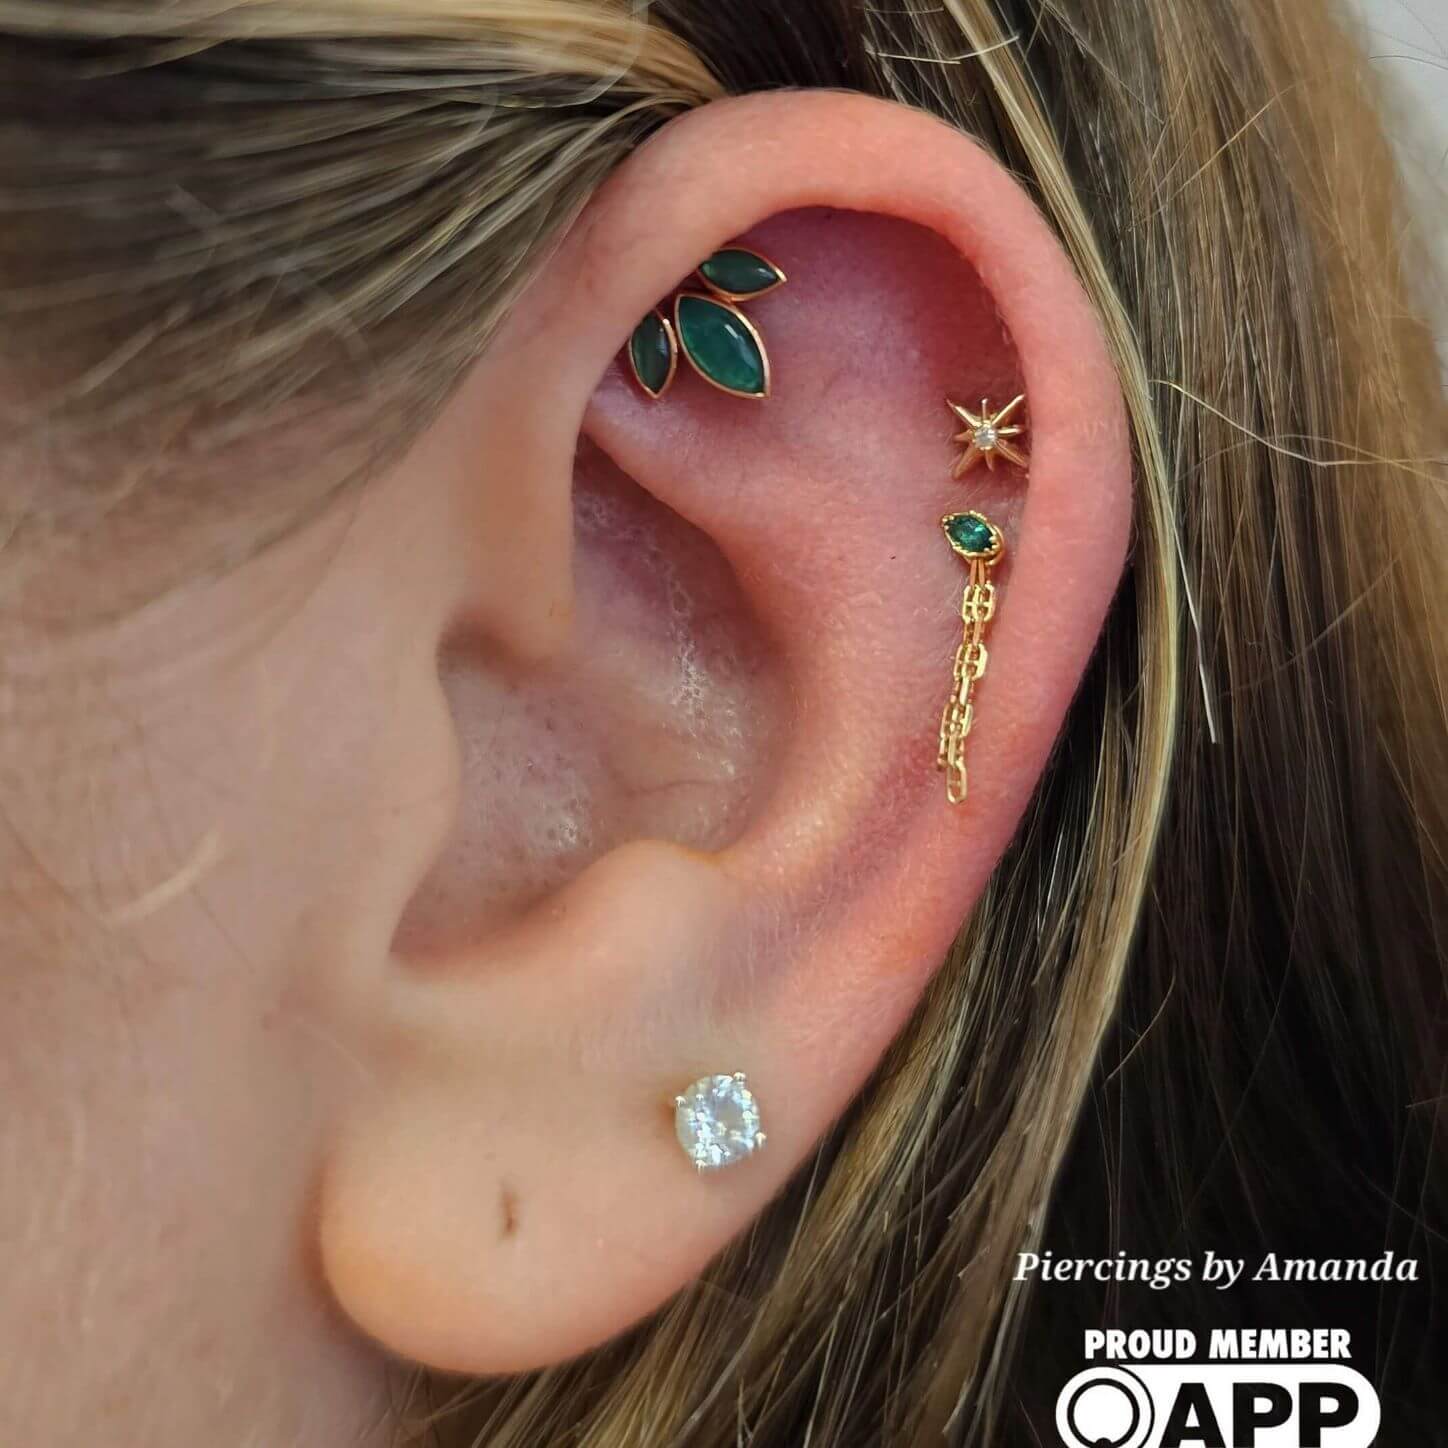 Ear curation with 14 and 18k yellow gold